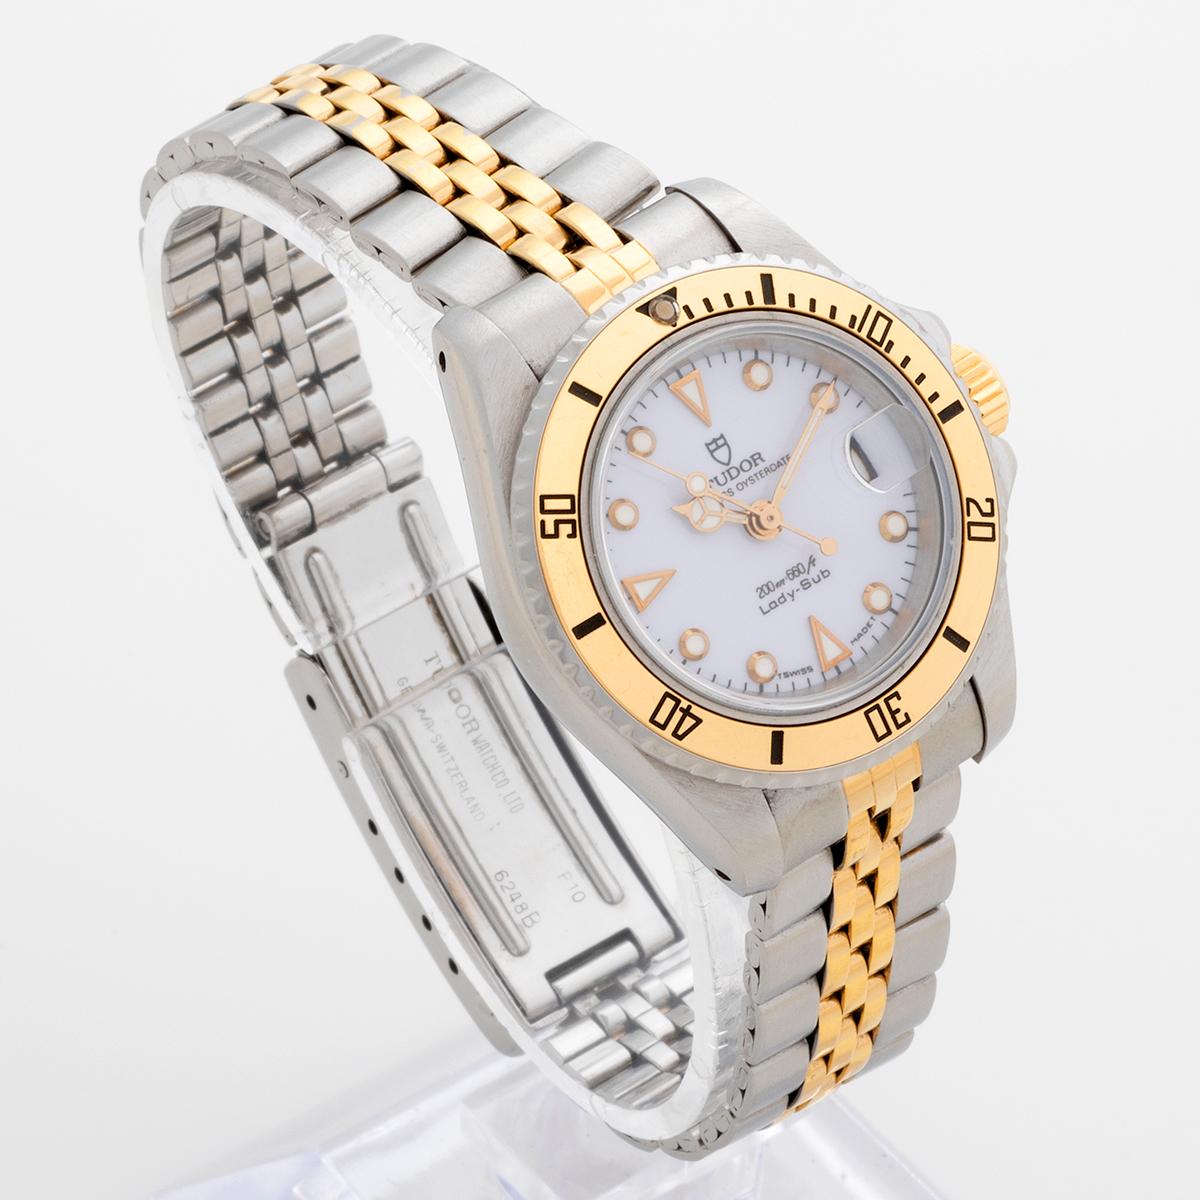 Our very rare vintage ladies Tudor Mini Sub, reference 96093 features a date, rotating bezel, automatic movement and gold capped with stainless steel 27mm case and bracelet. The case back is Rolex as is the gold tone original crown, as expected on